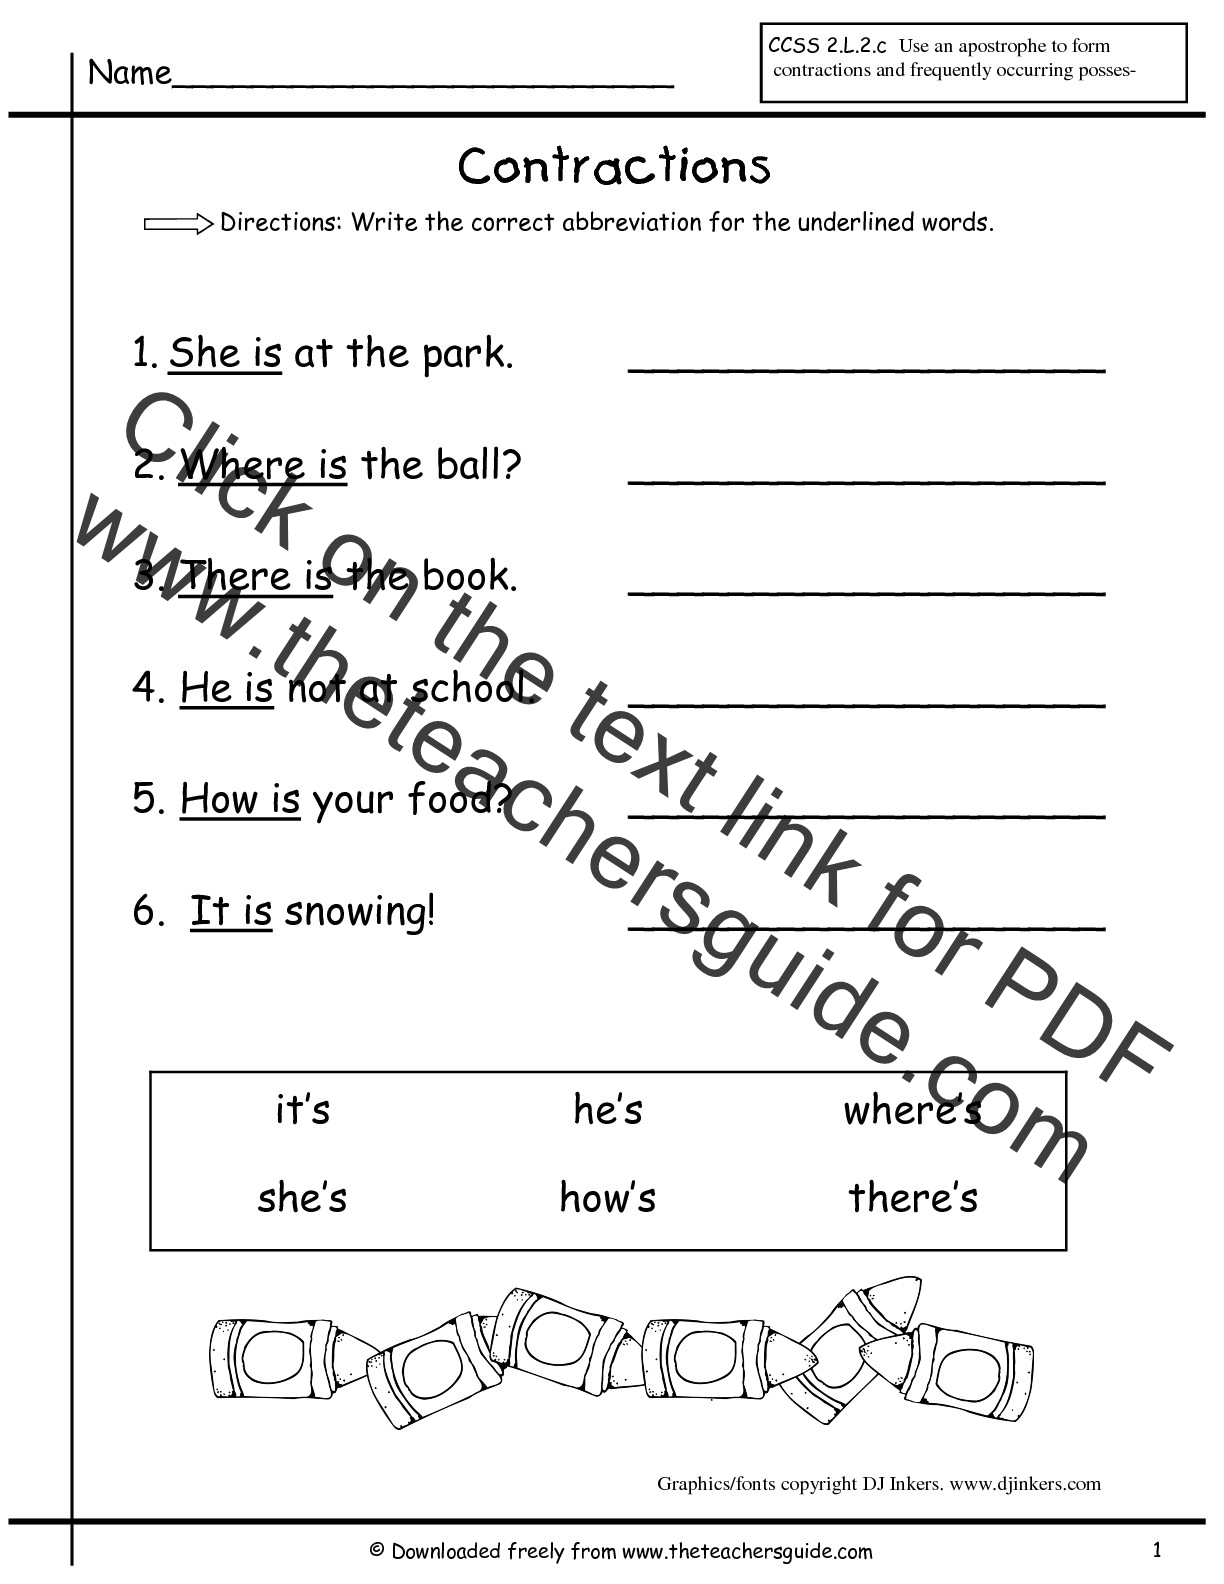 contraction-worksheet-grade-2-common-contractions-guide-2nd-grade-worksheets-2nd-some